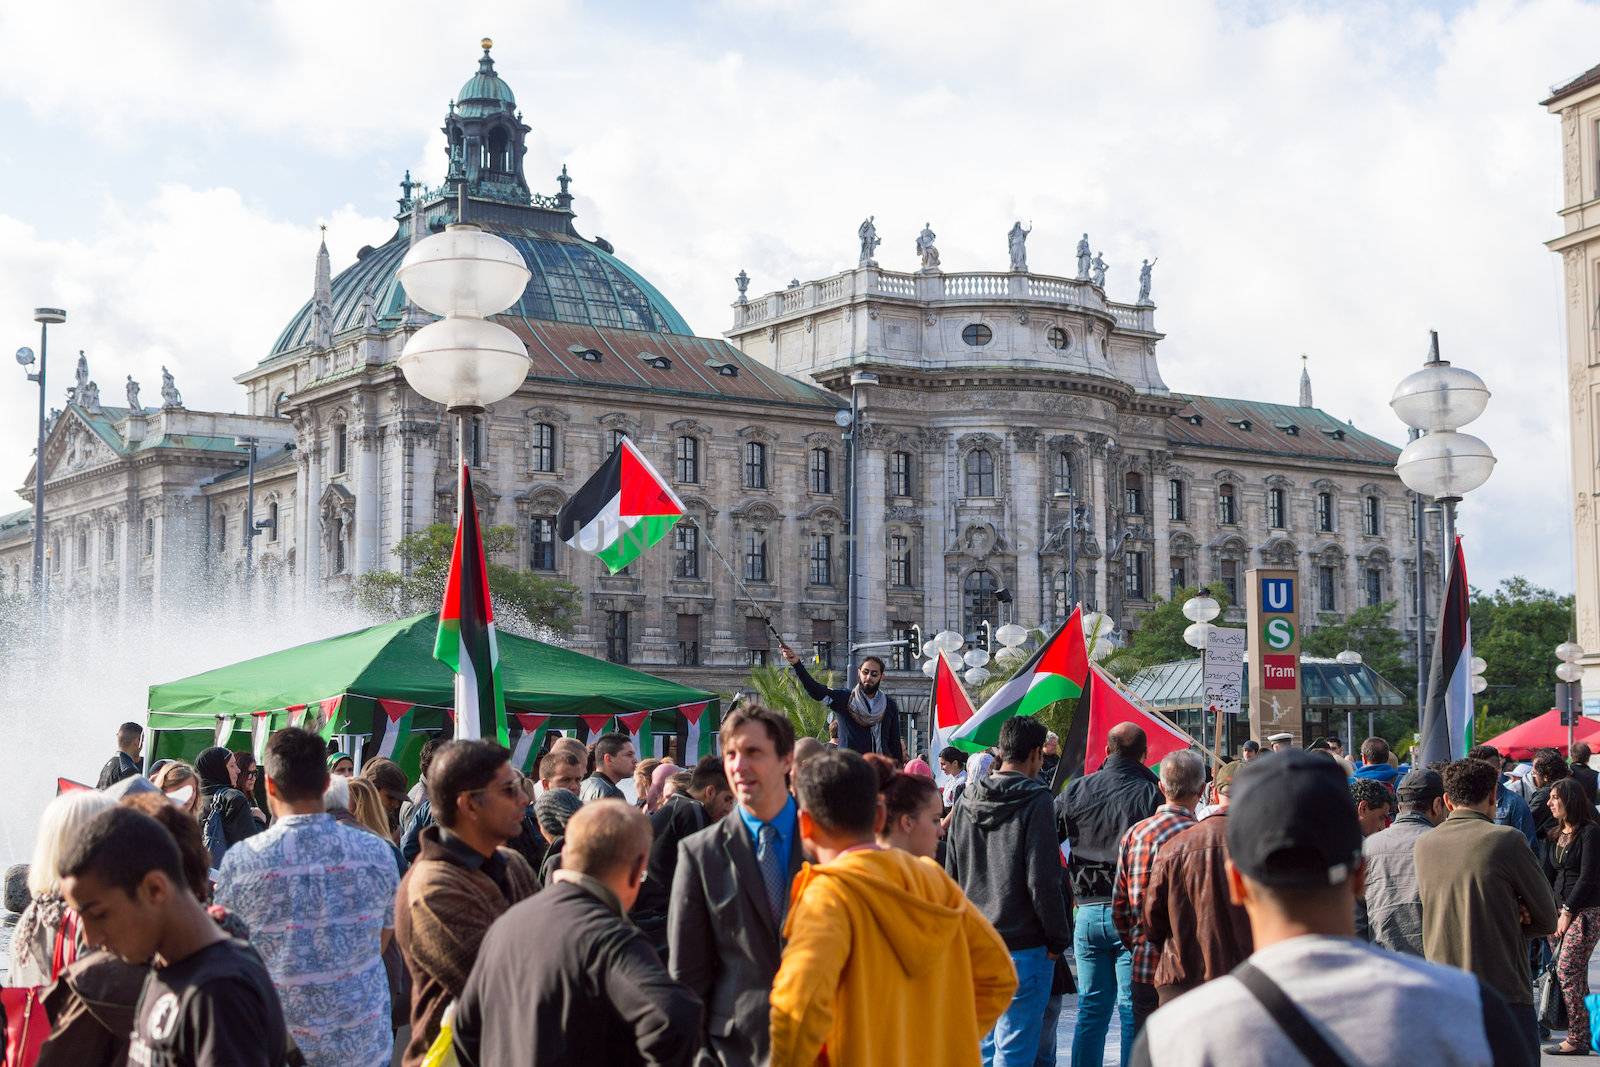 MUNICH, GERMANY - AUGUST 16, 2014: Pro-Palestinian demonstration in the central square of European city. Demonstrators are asking the German government for assistance in ending the Arab-Israeli conflict, and end the war in Gaza.